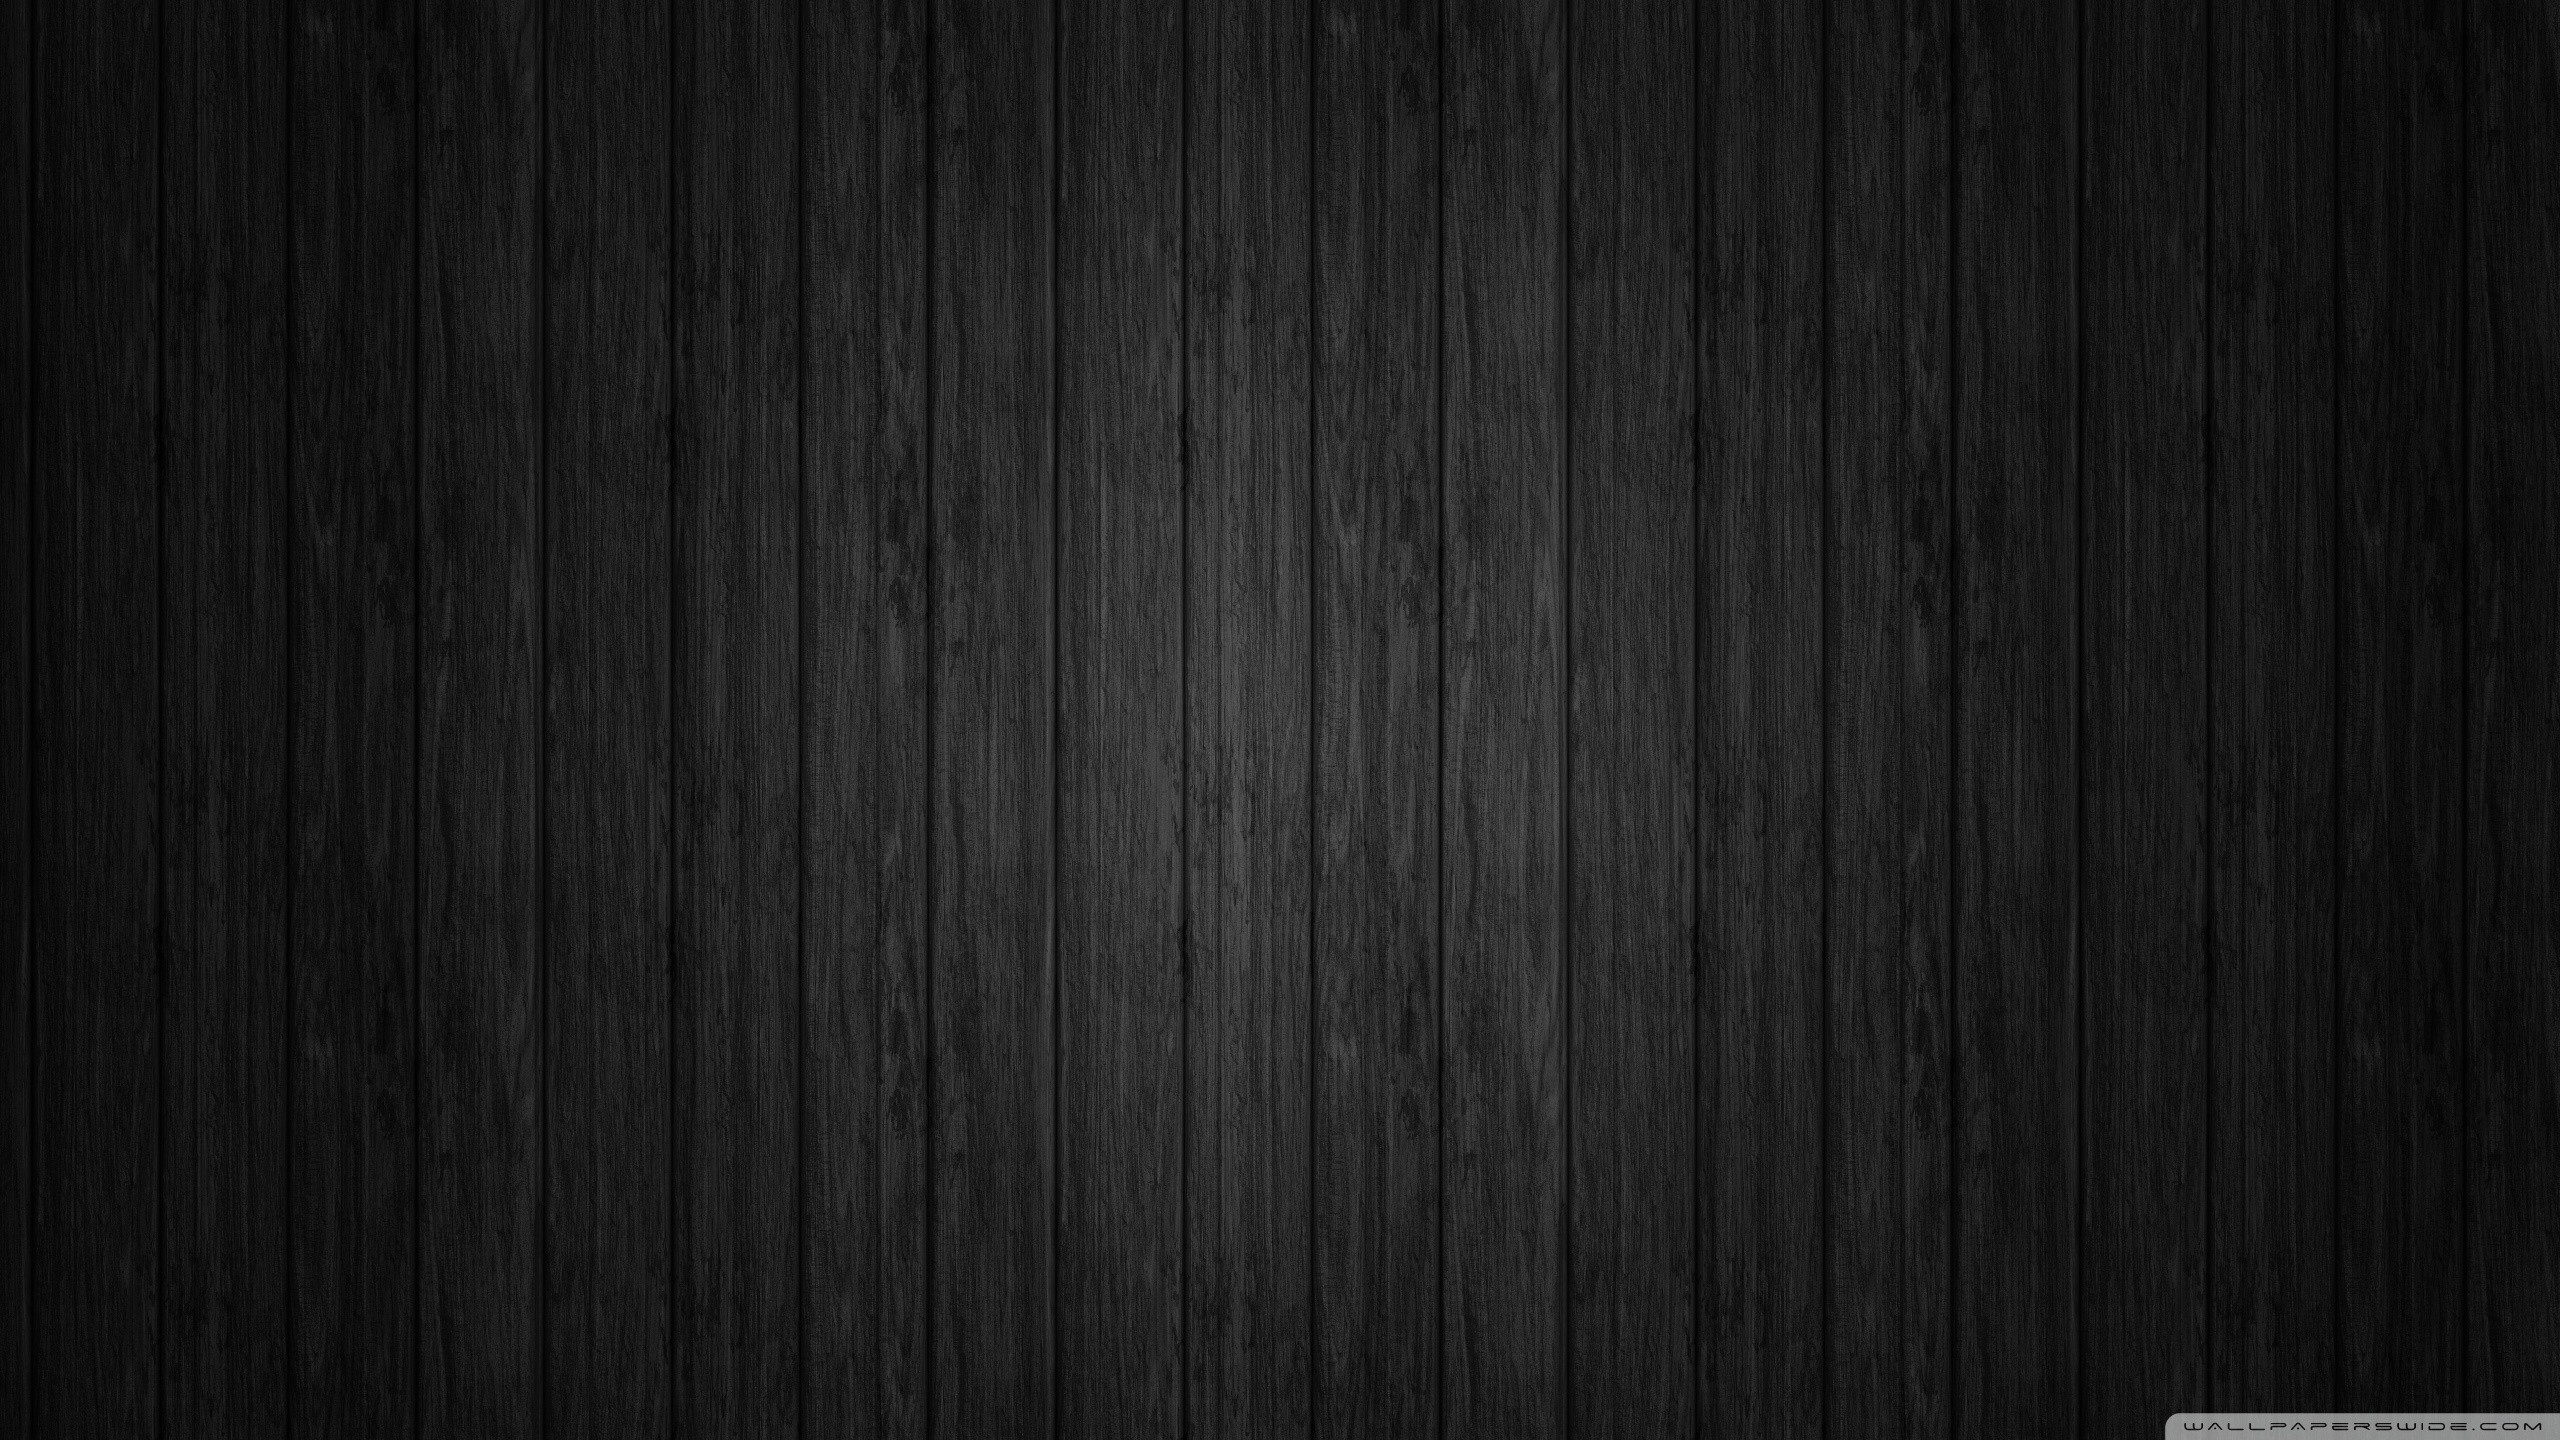 General 2560x1440 wood monochrome texture wooden surface